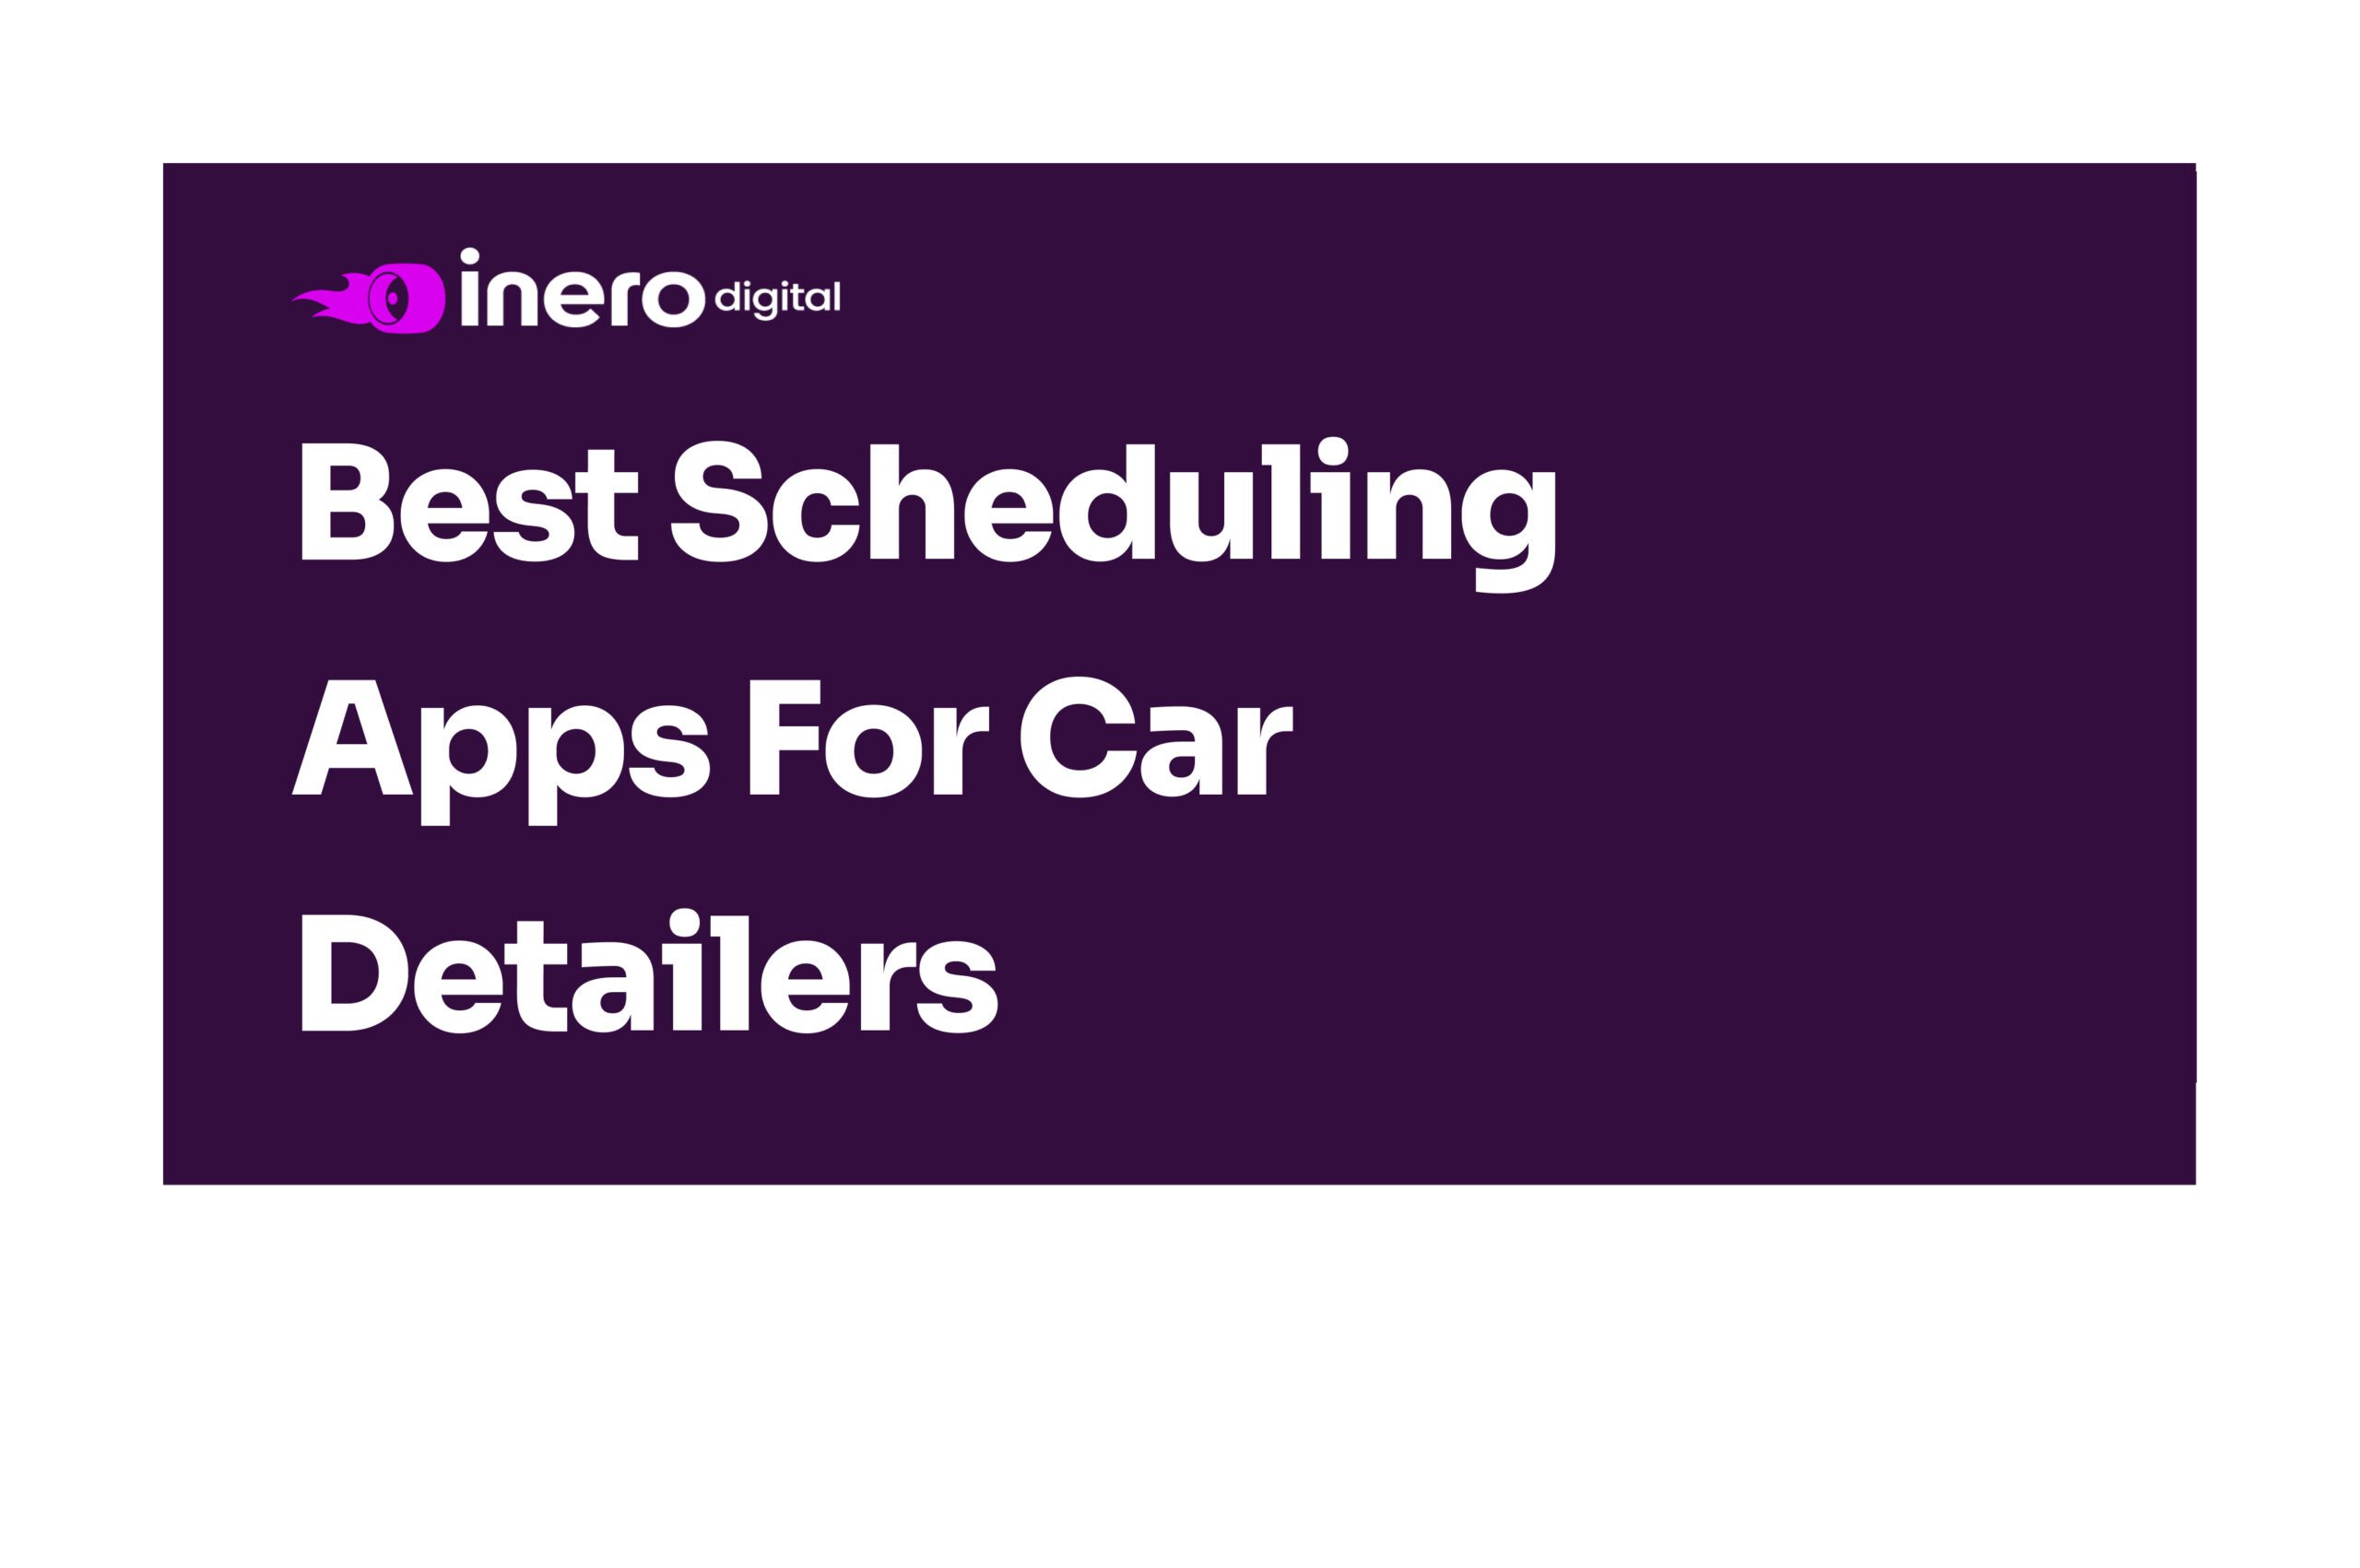 Best Scheduling Apps for Car Detailers